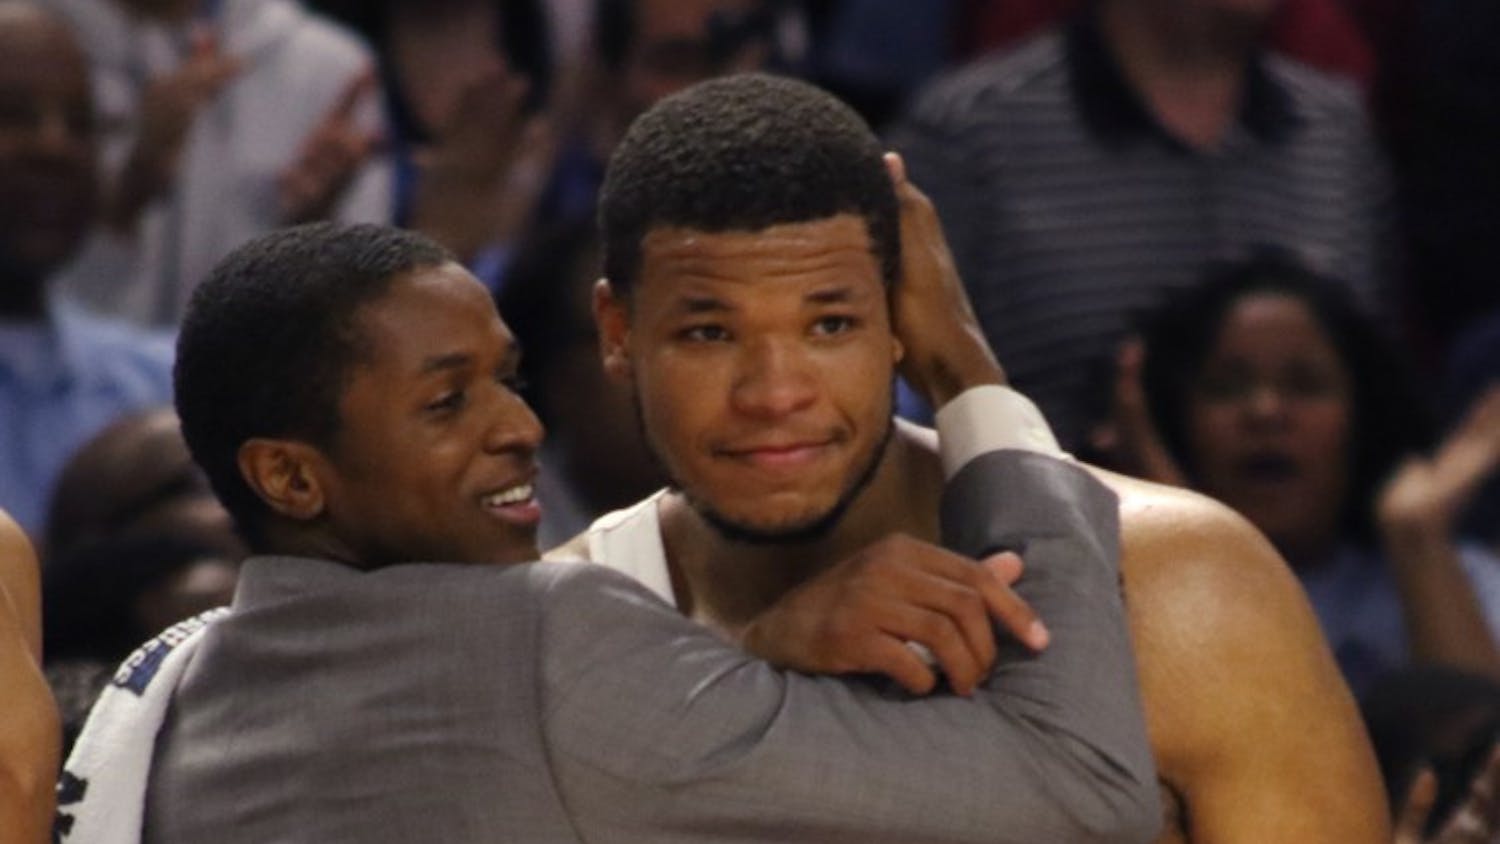 North Carolina forward Kennedy Meeks (3) is embraced by guard Kenny Williams on the bench at the end of the team's victory of Arkansas in the second round of the NCAA Tournament in Greenville on Sunday.